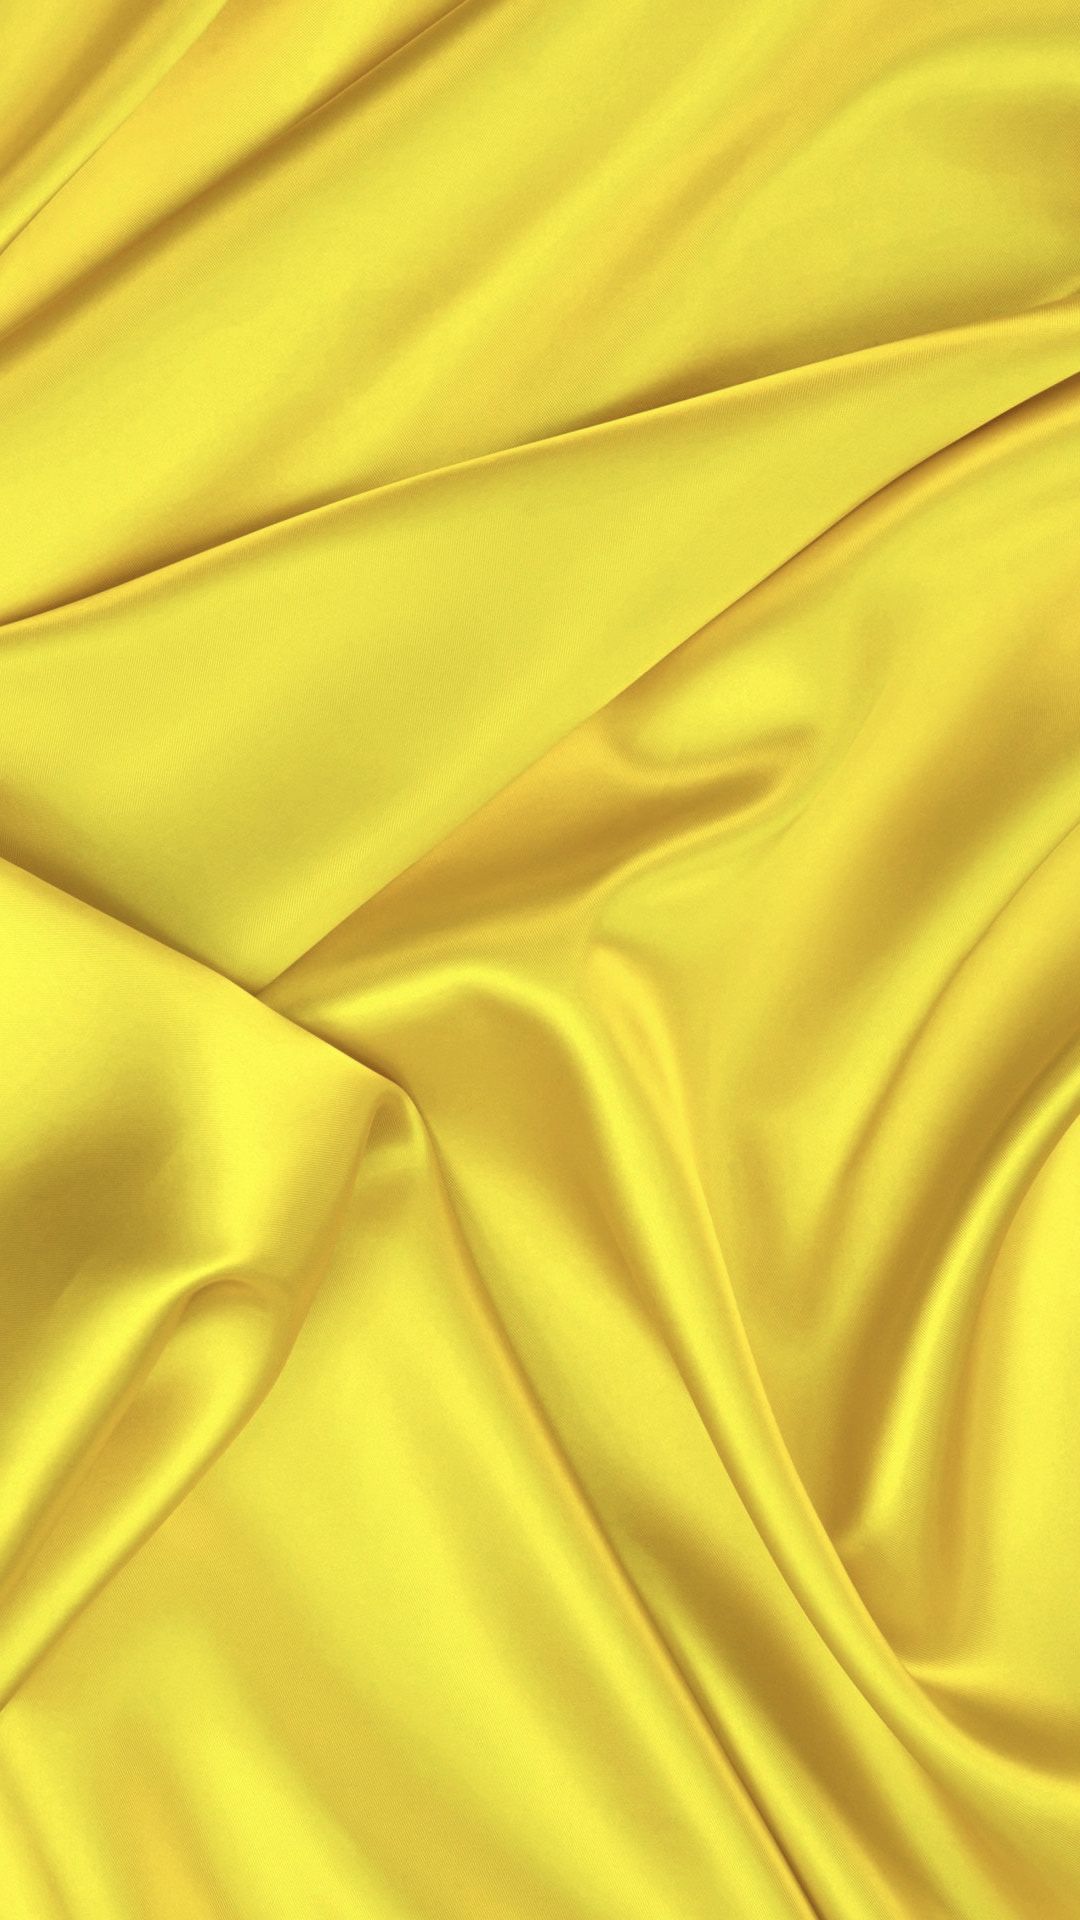 A yellow silk fabric with a beautiful texture. - Silk